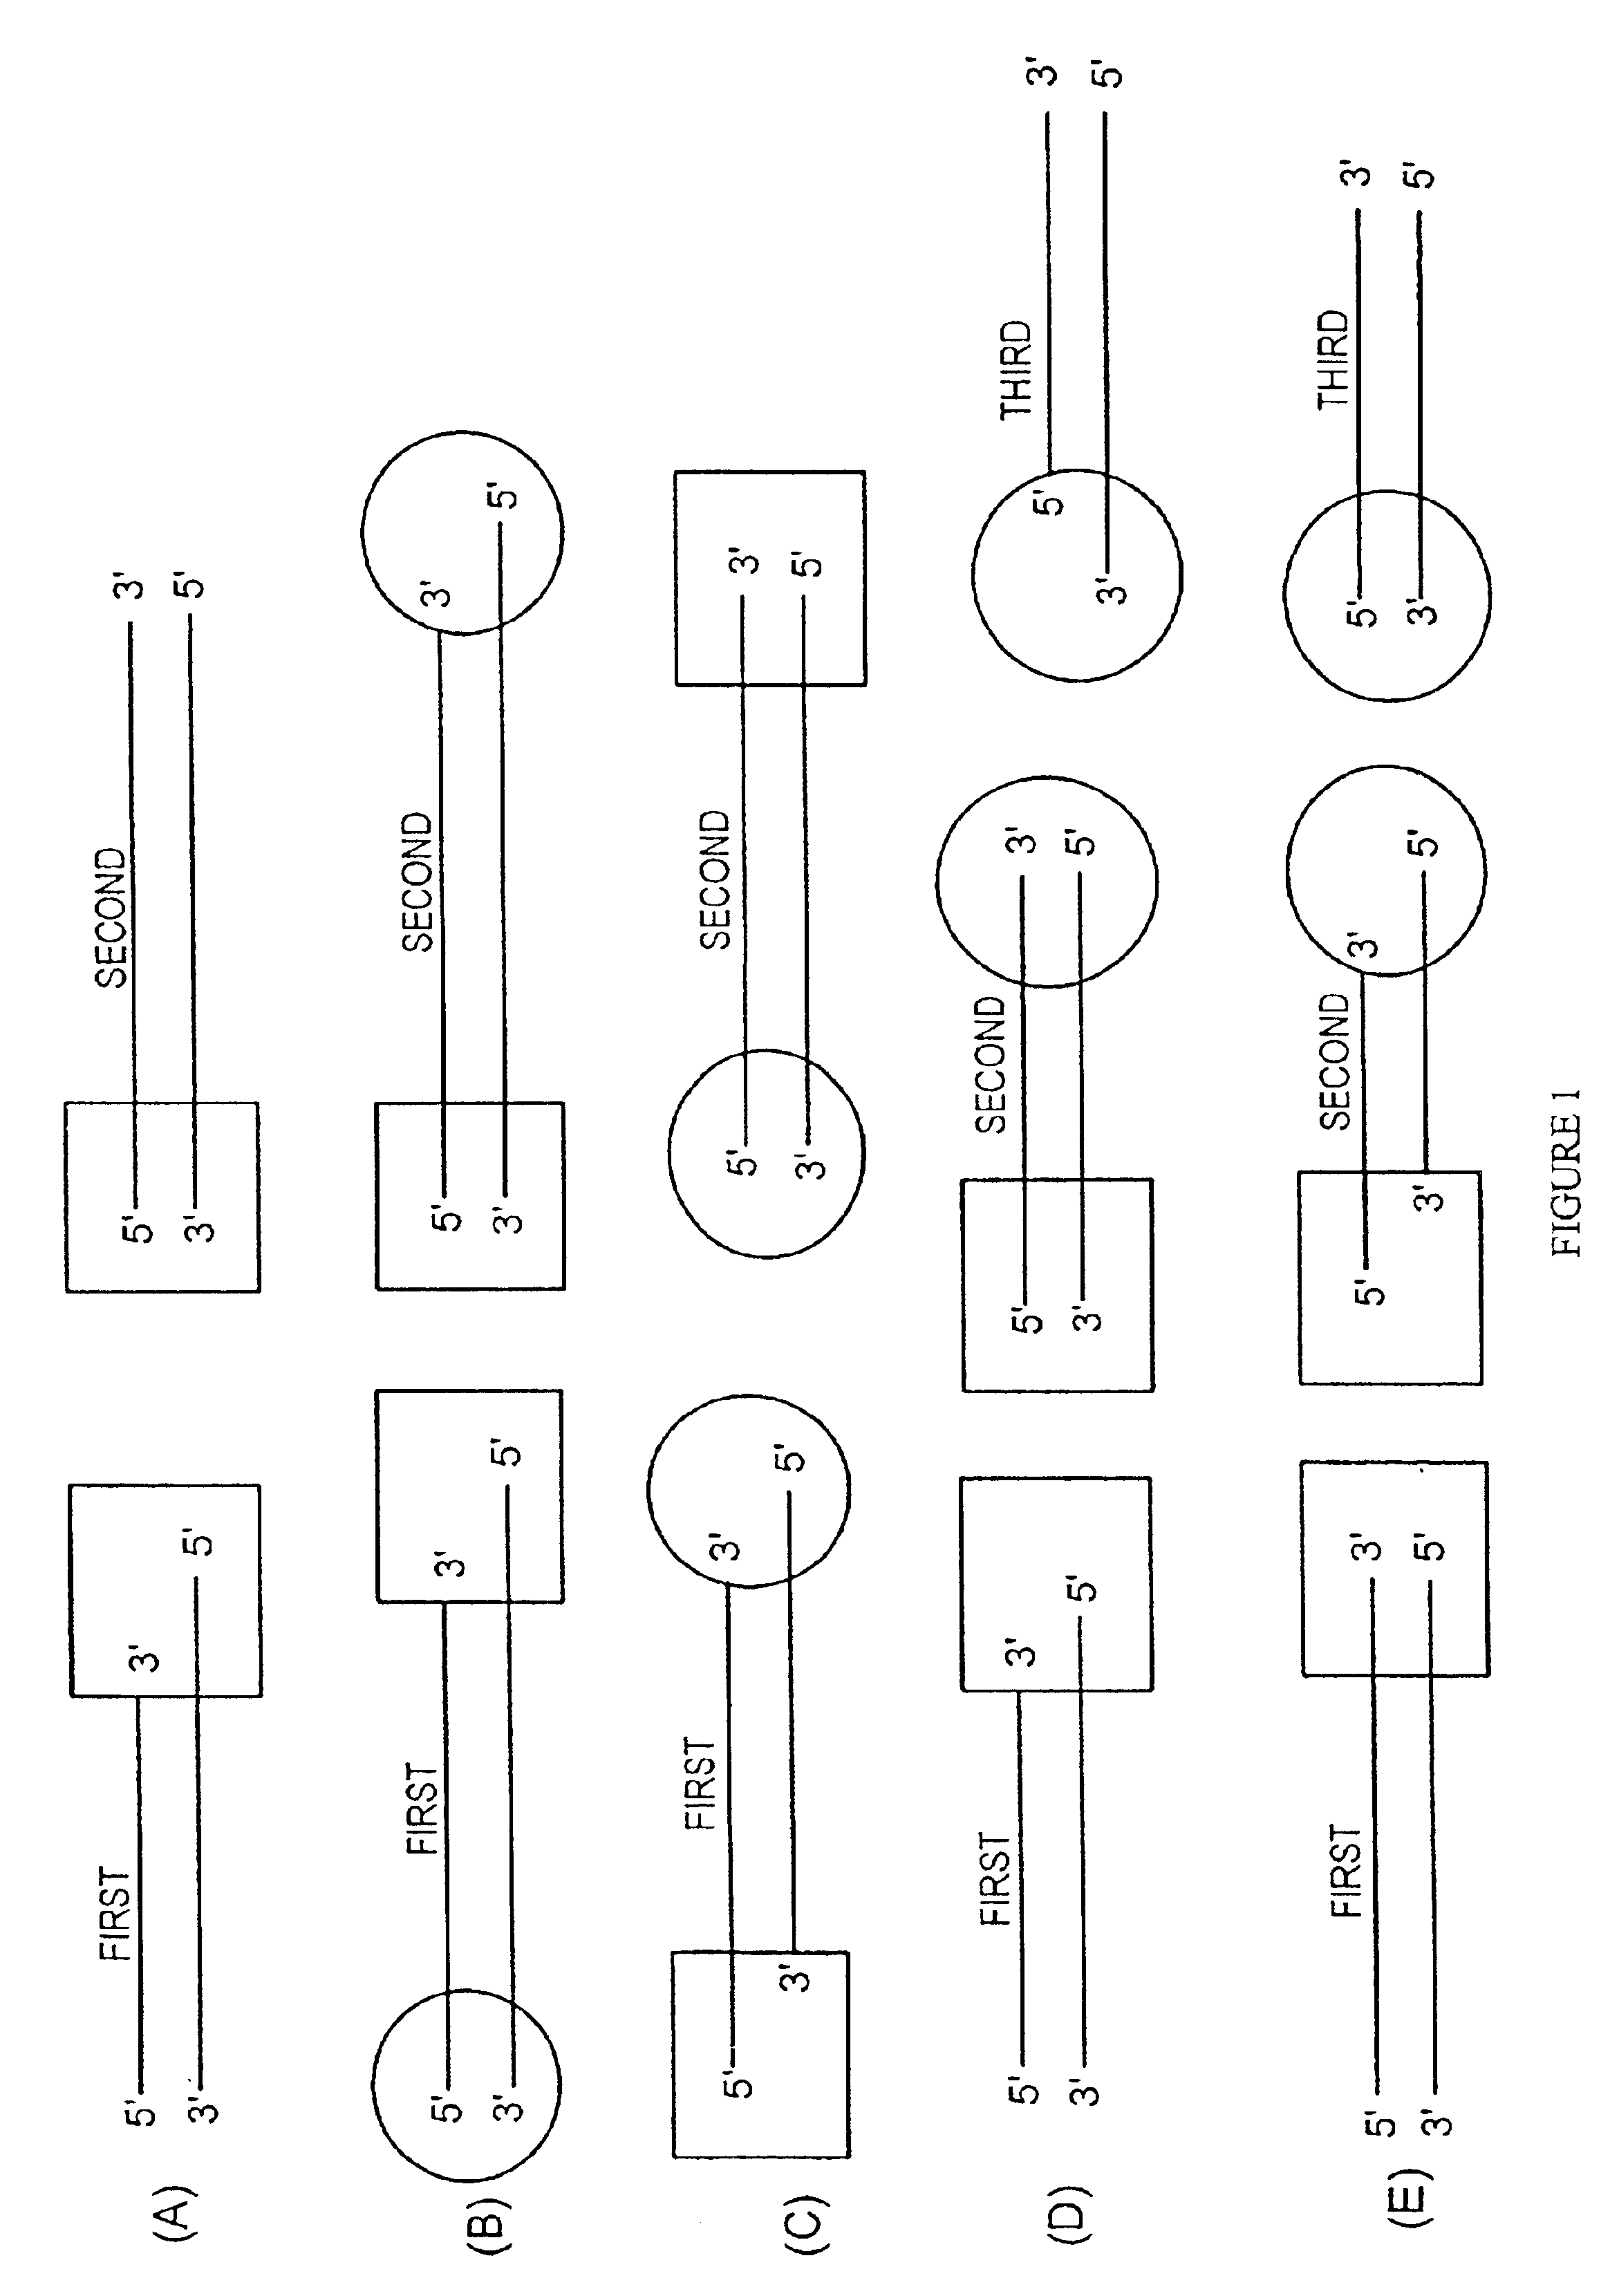 Methods and reagents for molecular cloning